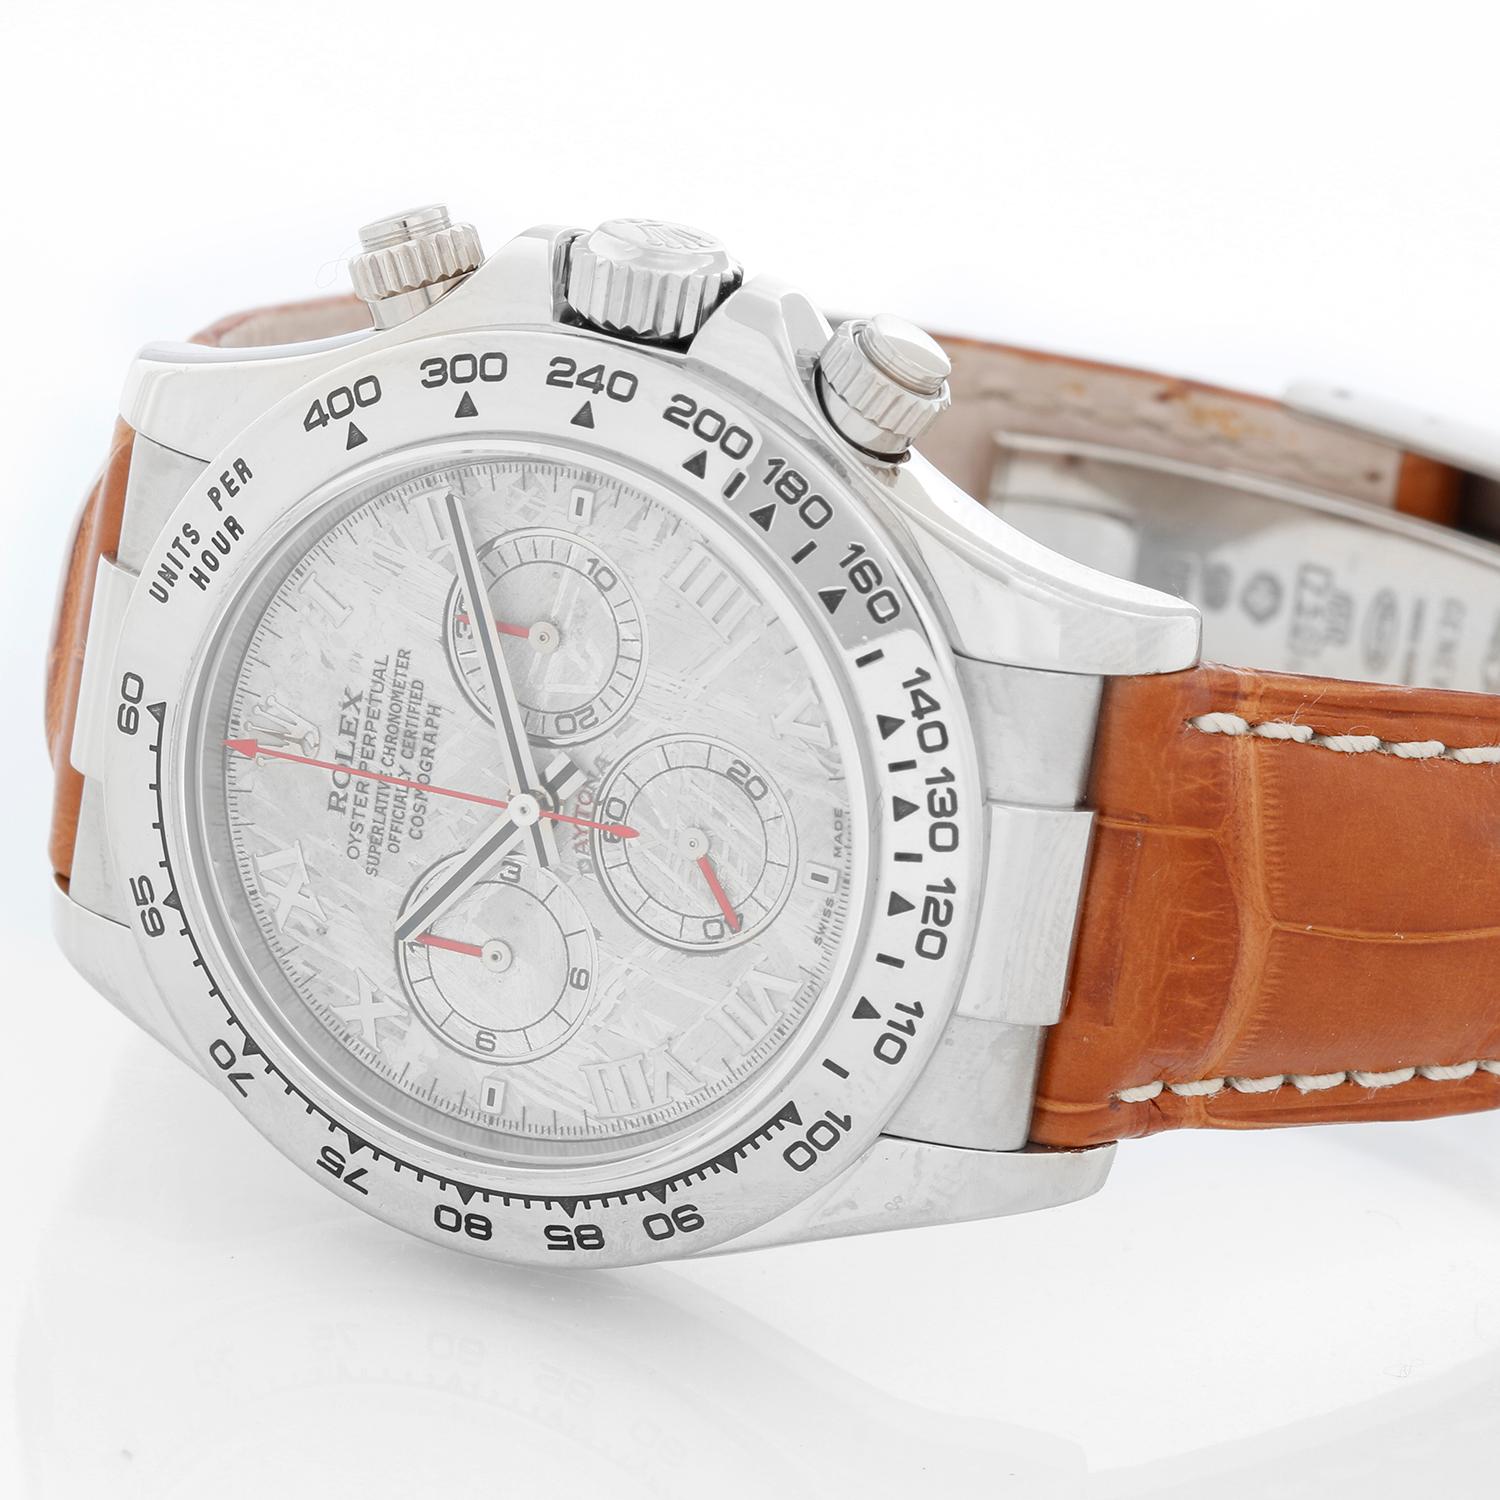 Rolex Cosmograph Daytona Men's White Gold  116519 - Automatic winding, chronograph, 44 jewels, sapphire crystal. 18k white gold case and bezel. Factory Meteorite Diamond Dial. Strap with Rolex 18k white gold deployant clasp. Pre-owned with Rolex box